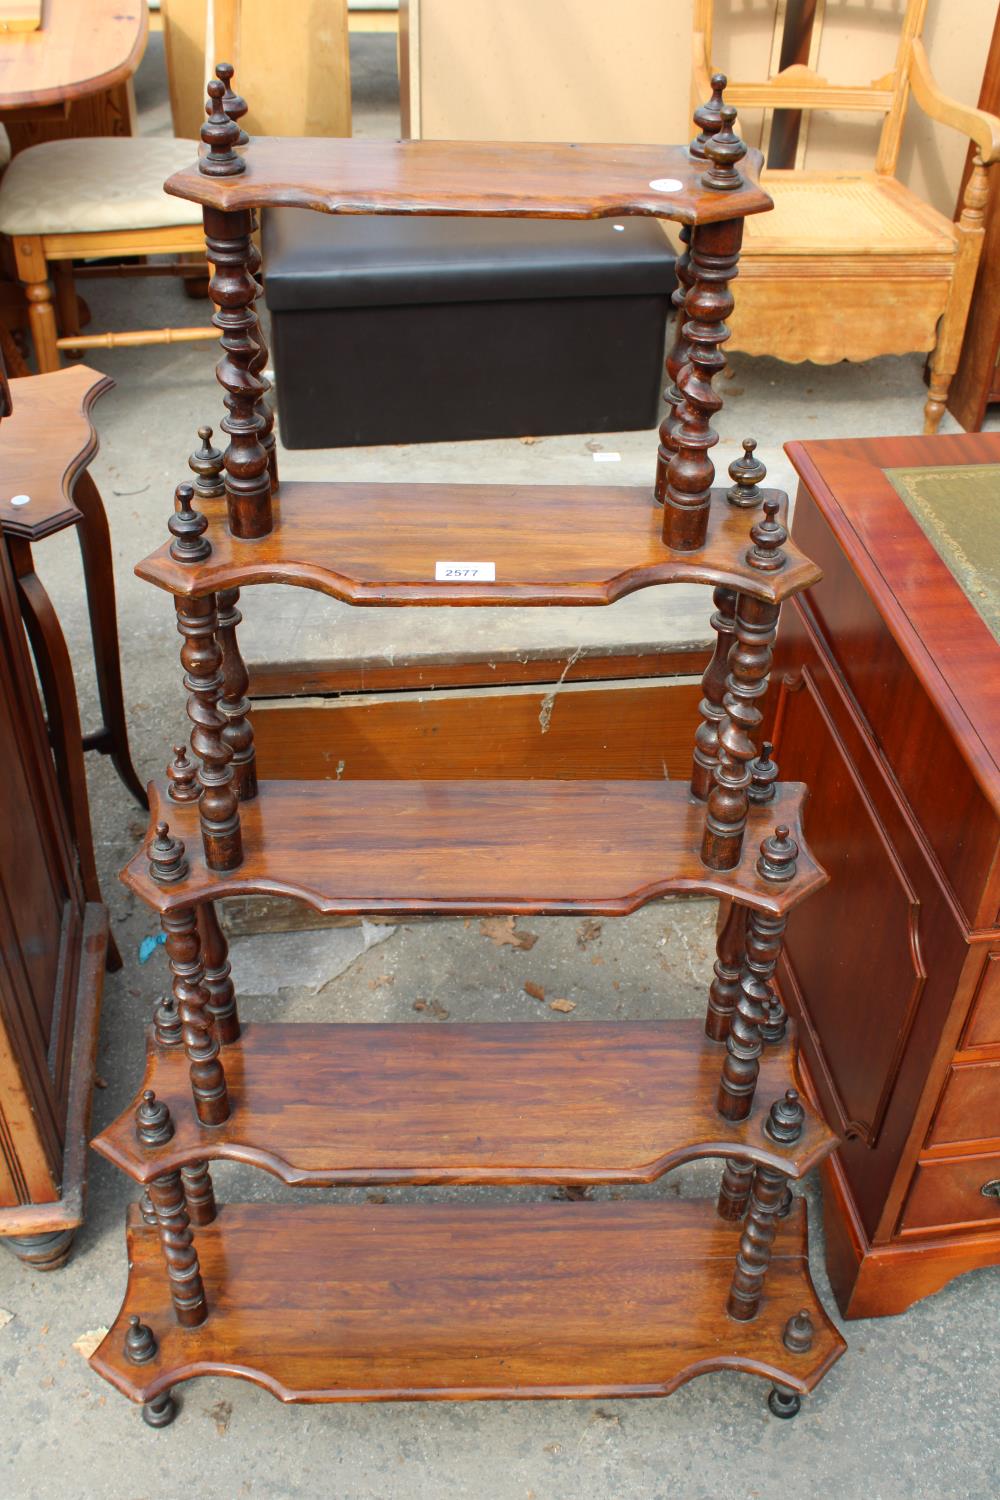 A VICTORIAN FIVE TIER WATERFALL WHATNOT WITH BARLEY TWIST UPRIGHTS, 29" WIDE